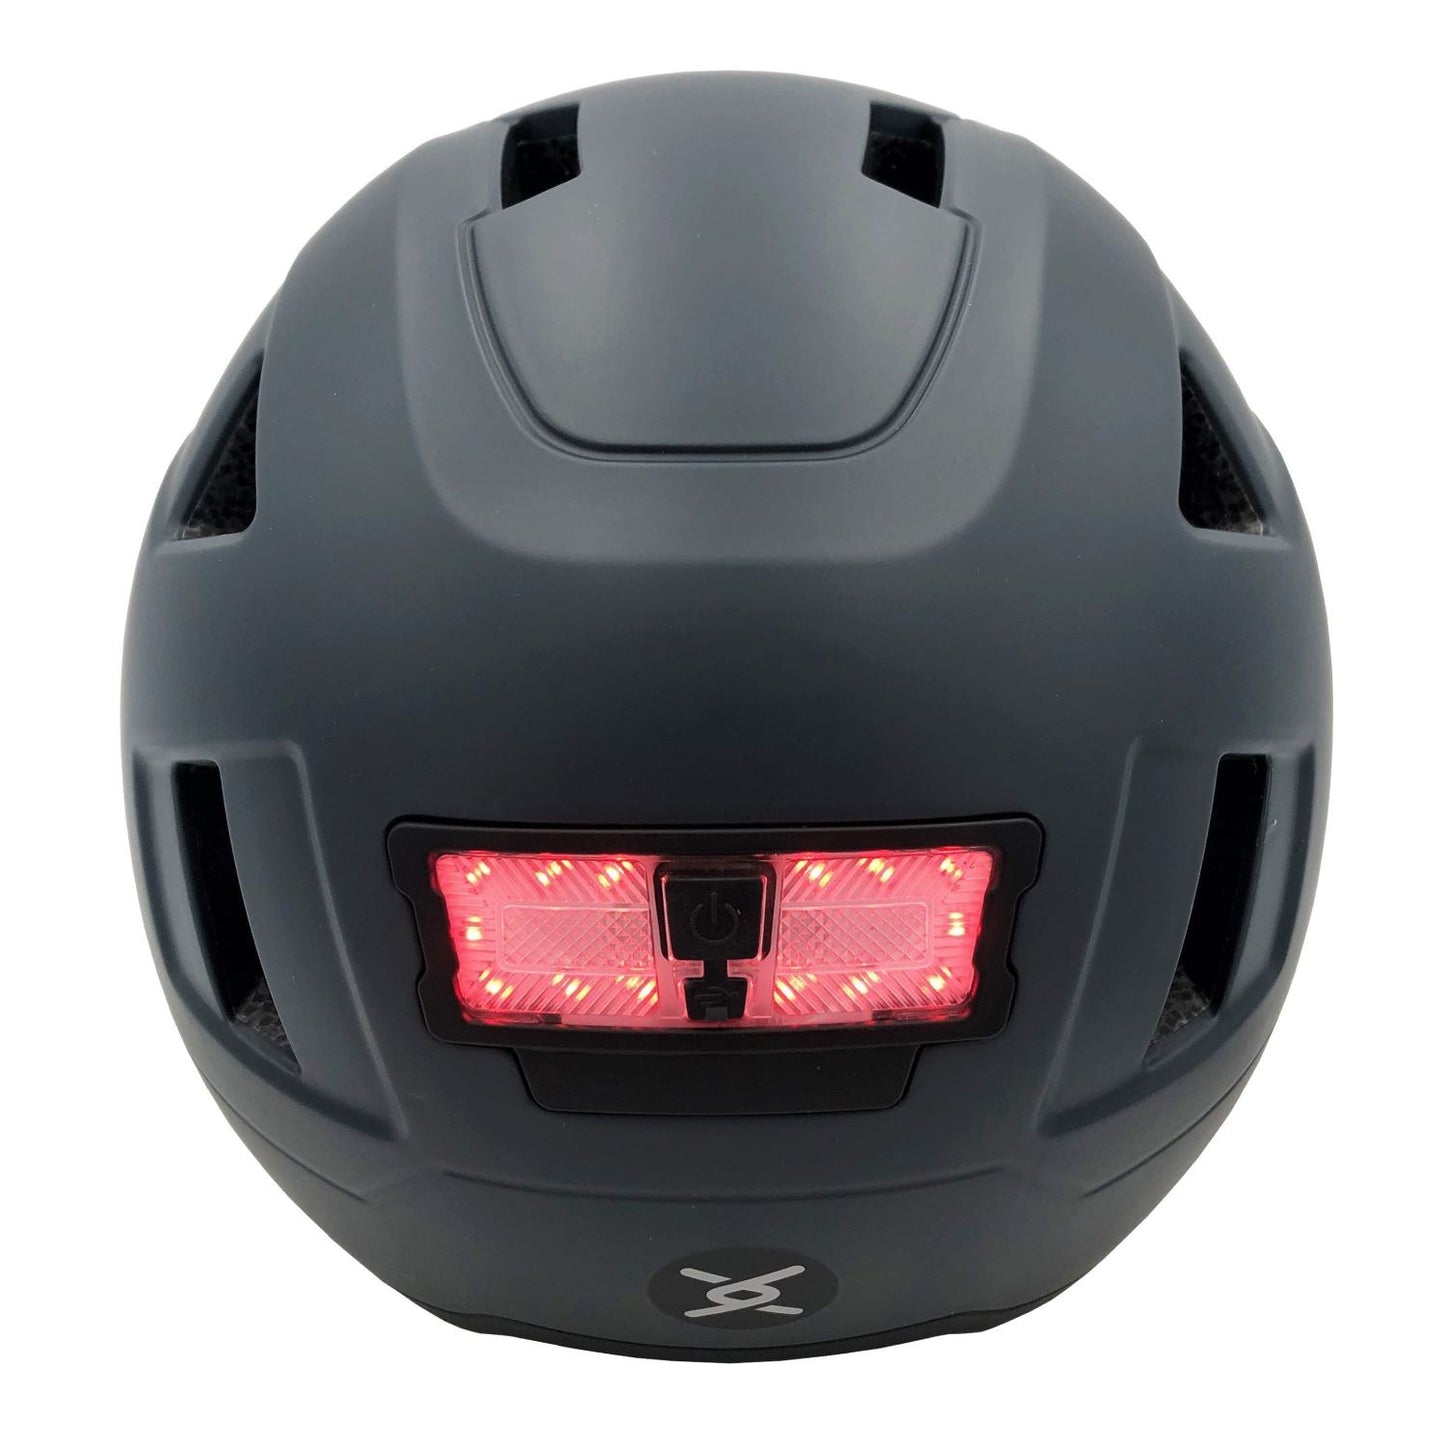 A black XNITO e-bike helmet with a red LED safety light illuminated at the back, CPSC and NTA-8776 certified.